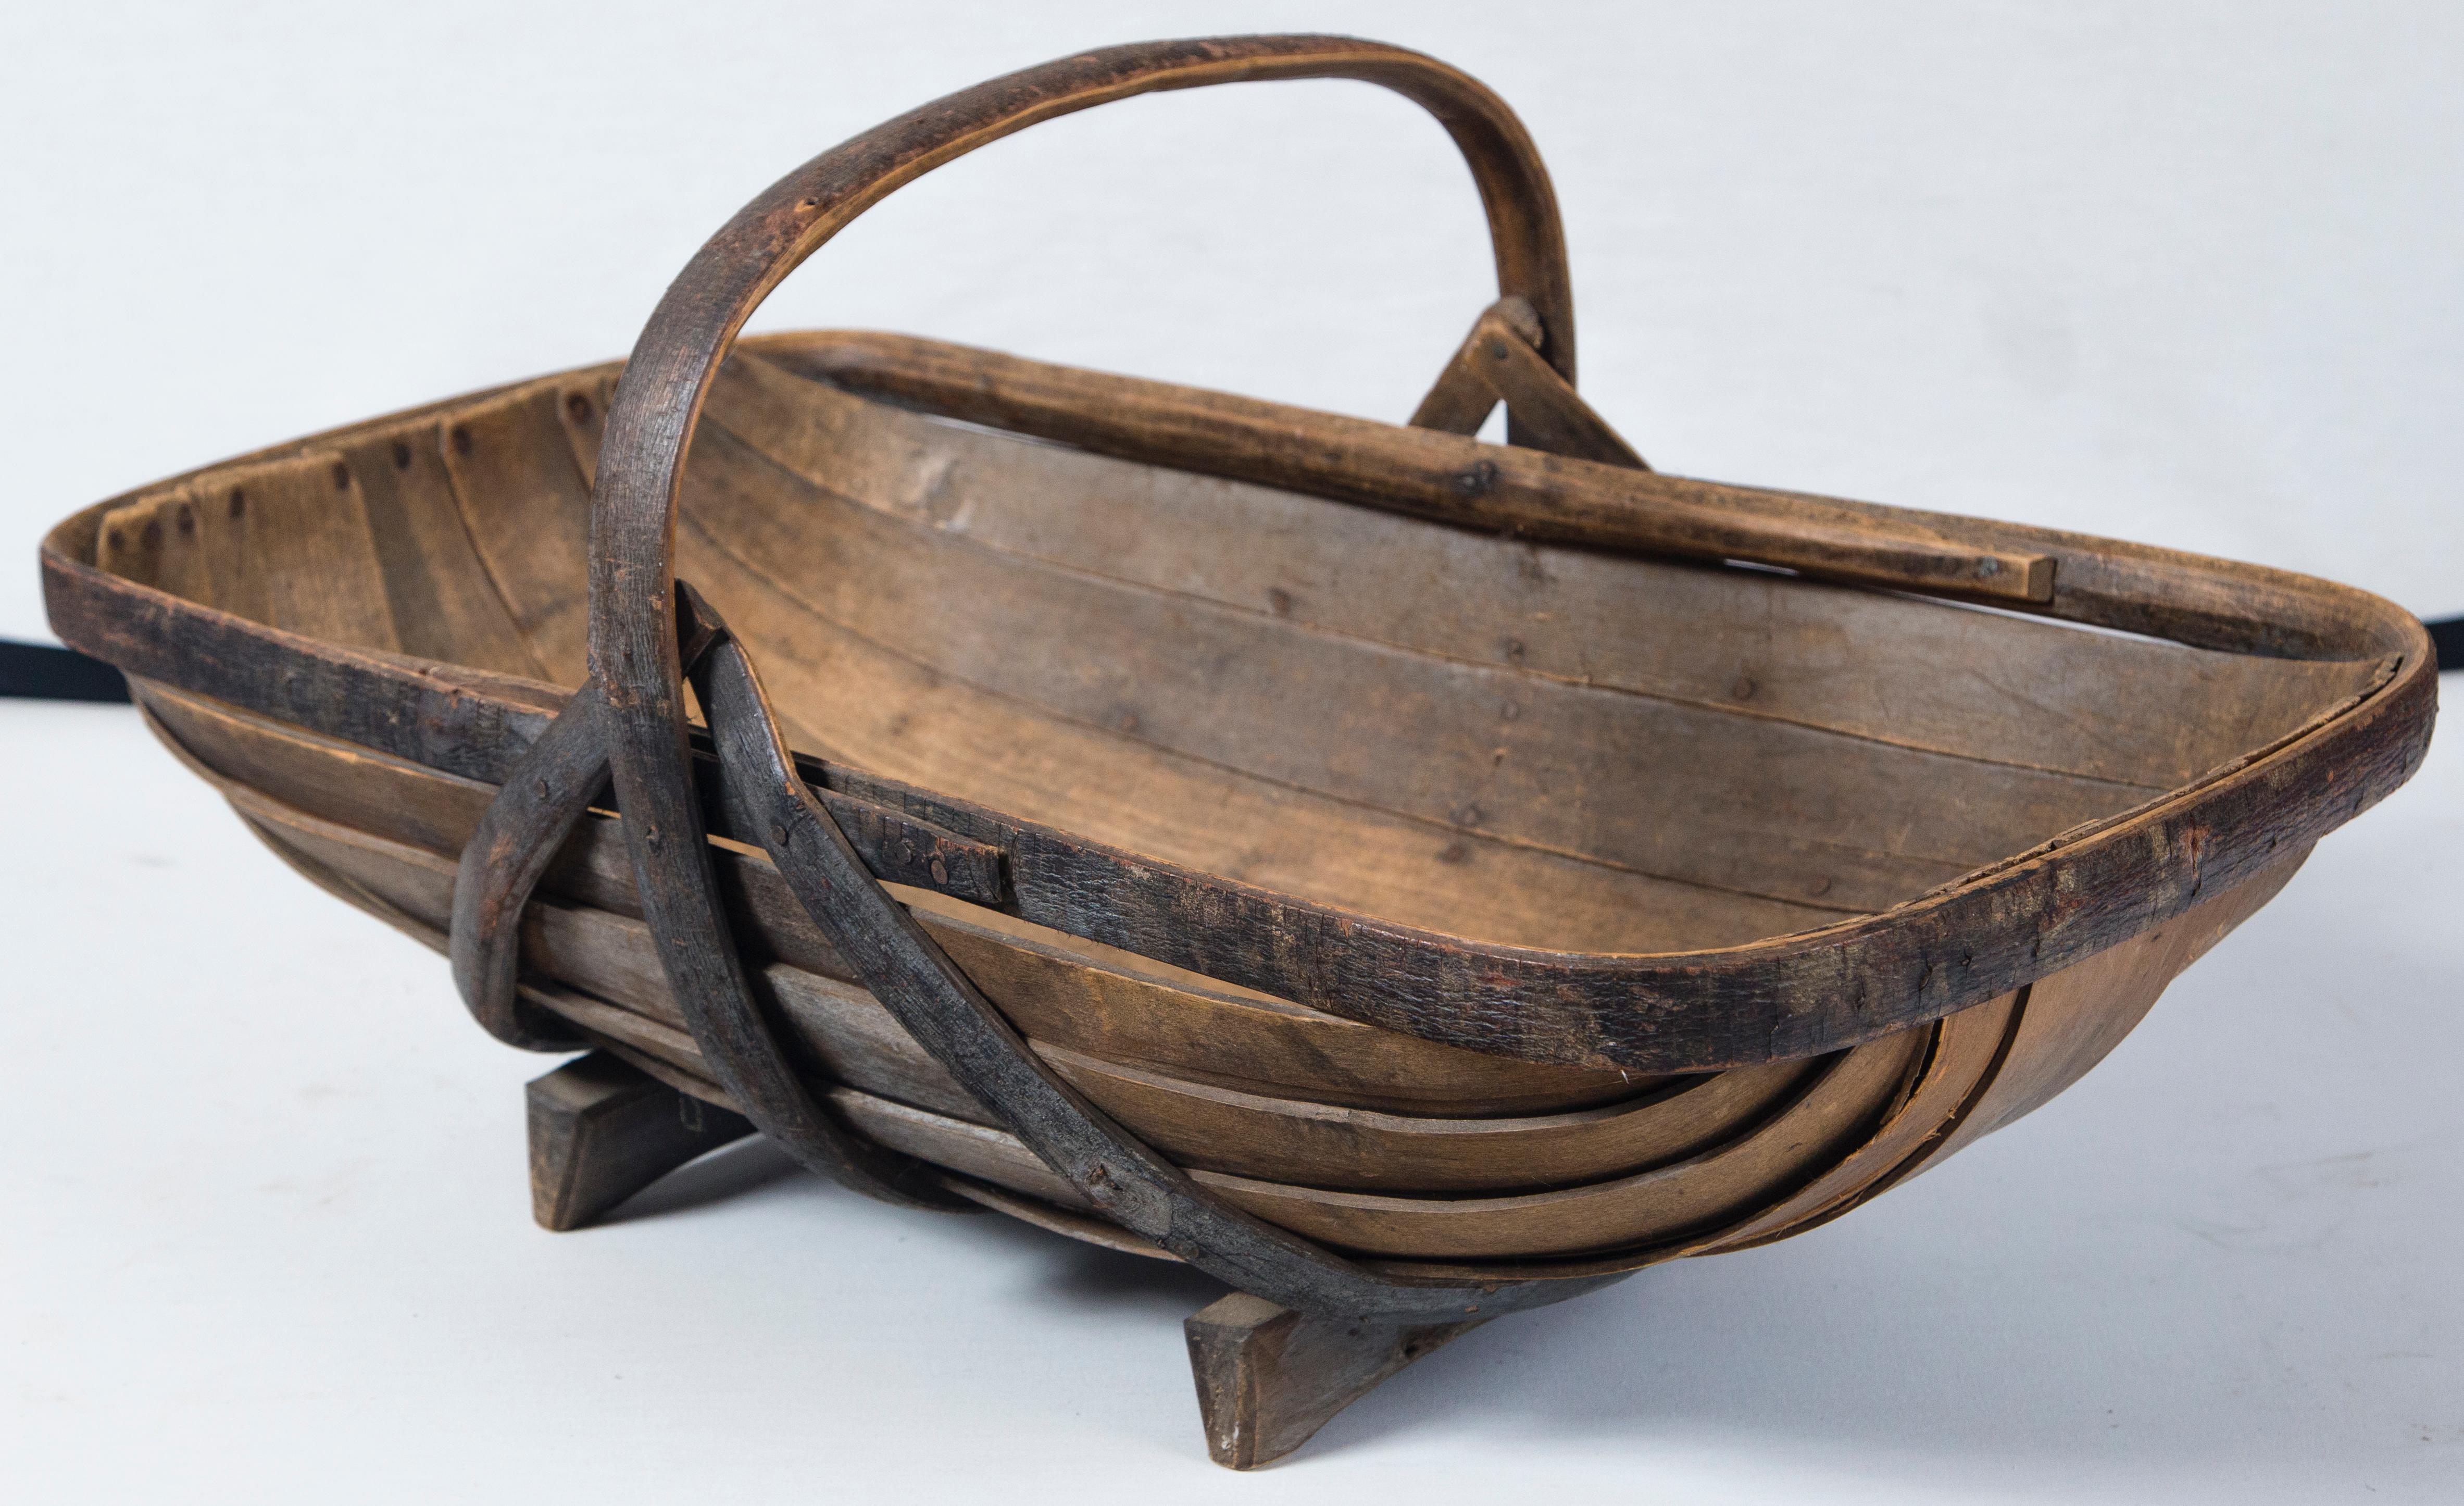 Antique English garden trug, circa 1910. A rare, extra large size to carry cut flowers from the garden. Bentwood construction with wonderful aged surface.